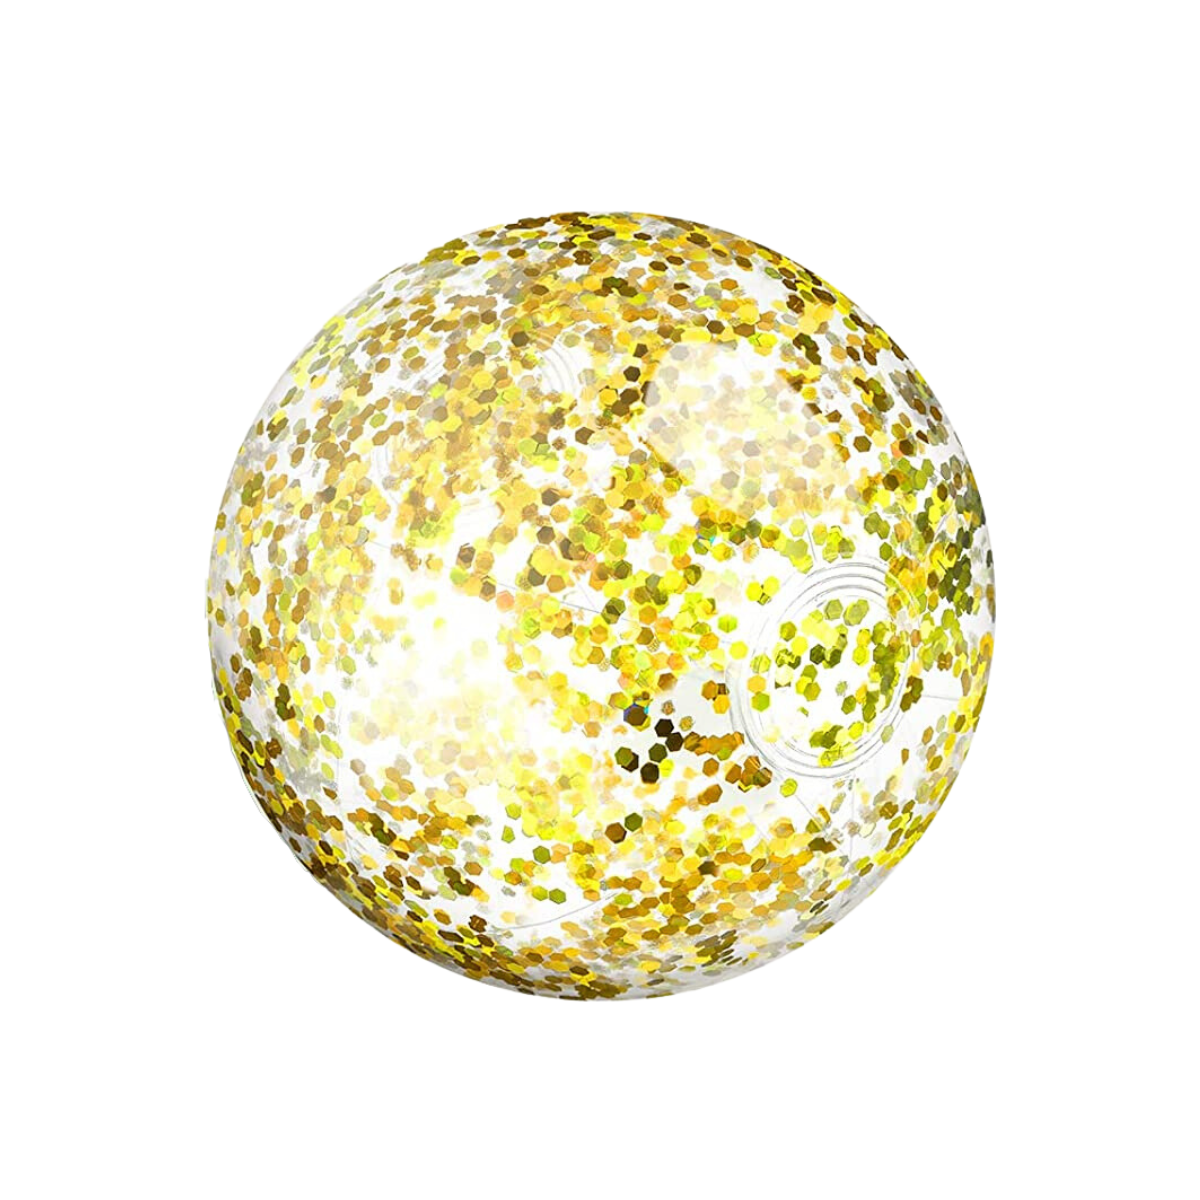 Glittery Light Up Inflatable Beach Ball | Black Bow Gift Co.